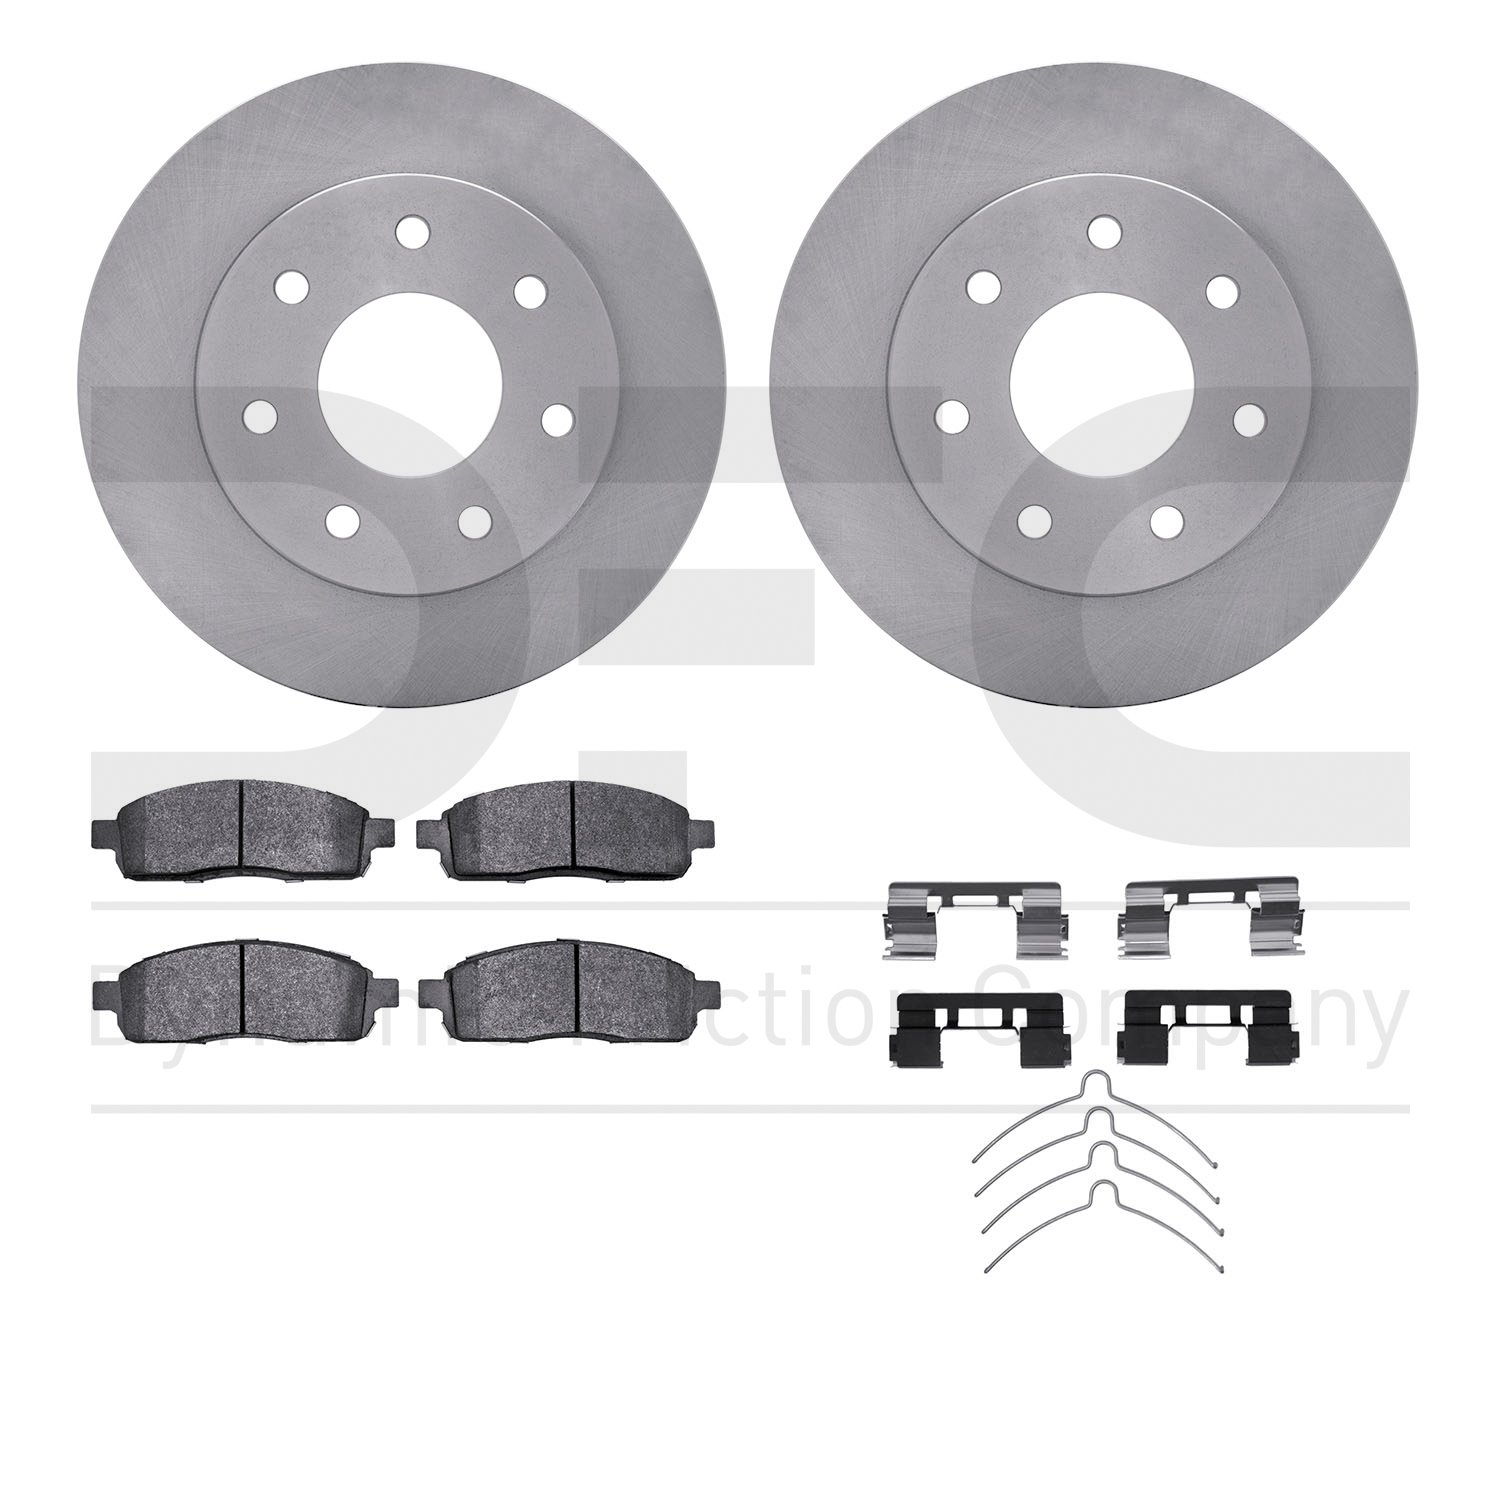 6412-54218 Brake Rotors with Ultimate-Duty Brake Pads Kit & Hardware, 2004-2008 Ford/Lincoln/Mercury/Mazda, Position: Front